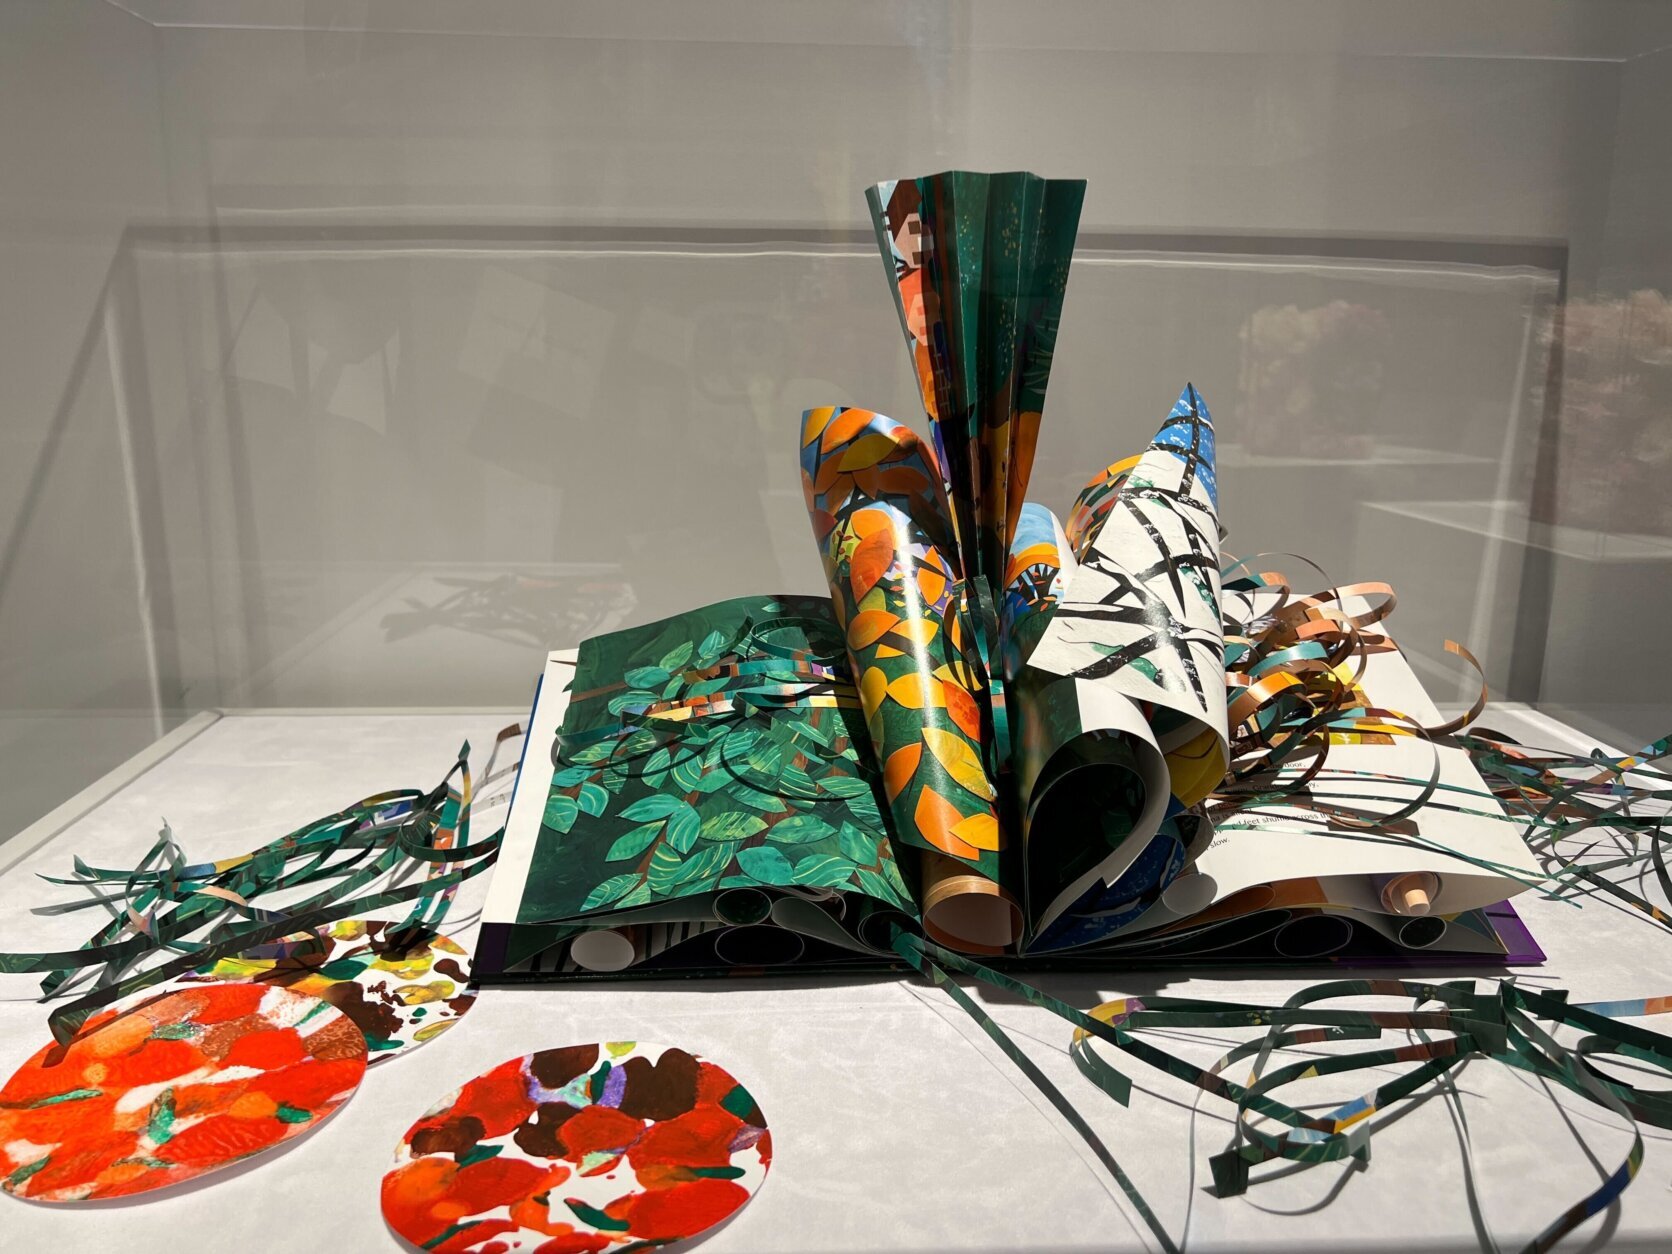 <p>A book created by artist Adjoa Jackson Burrowes in 1957 and gifted to the museum.</p>
